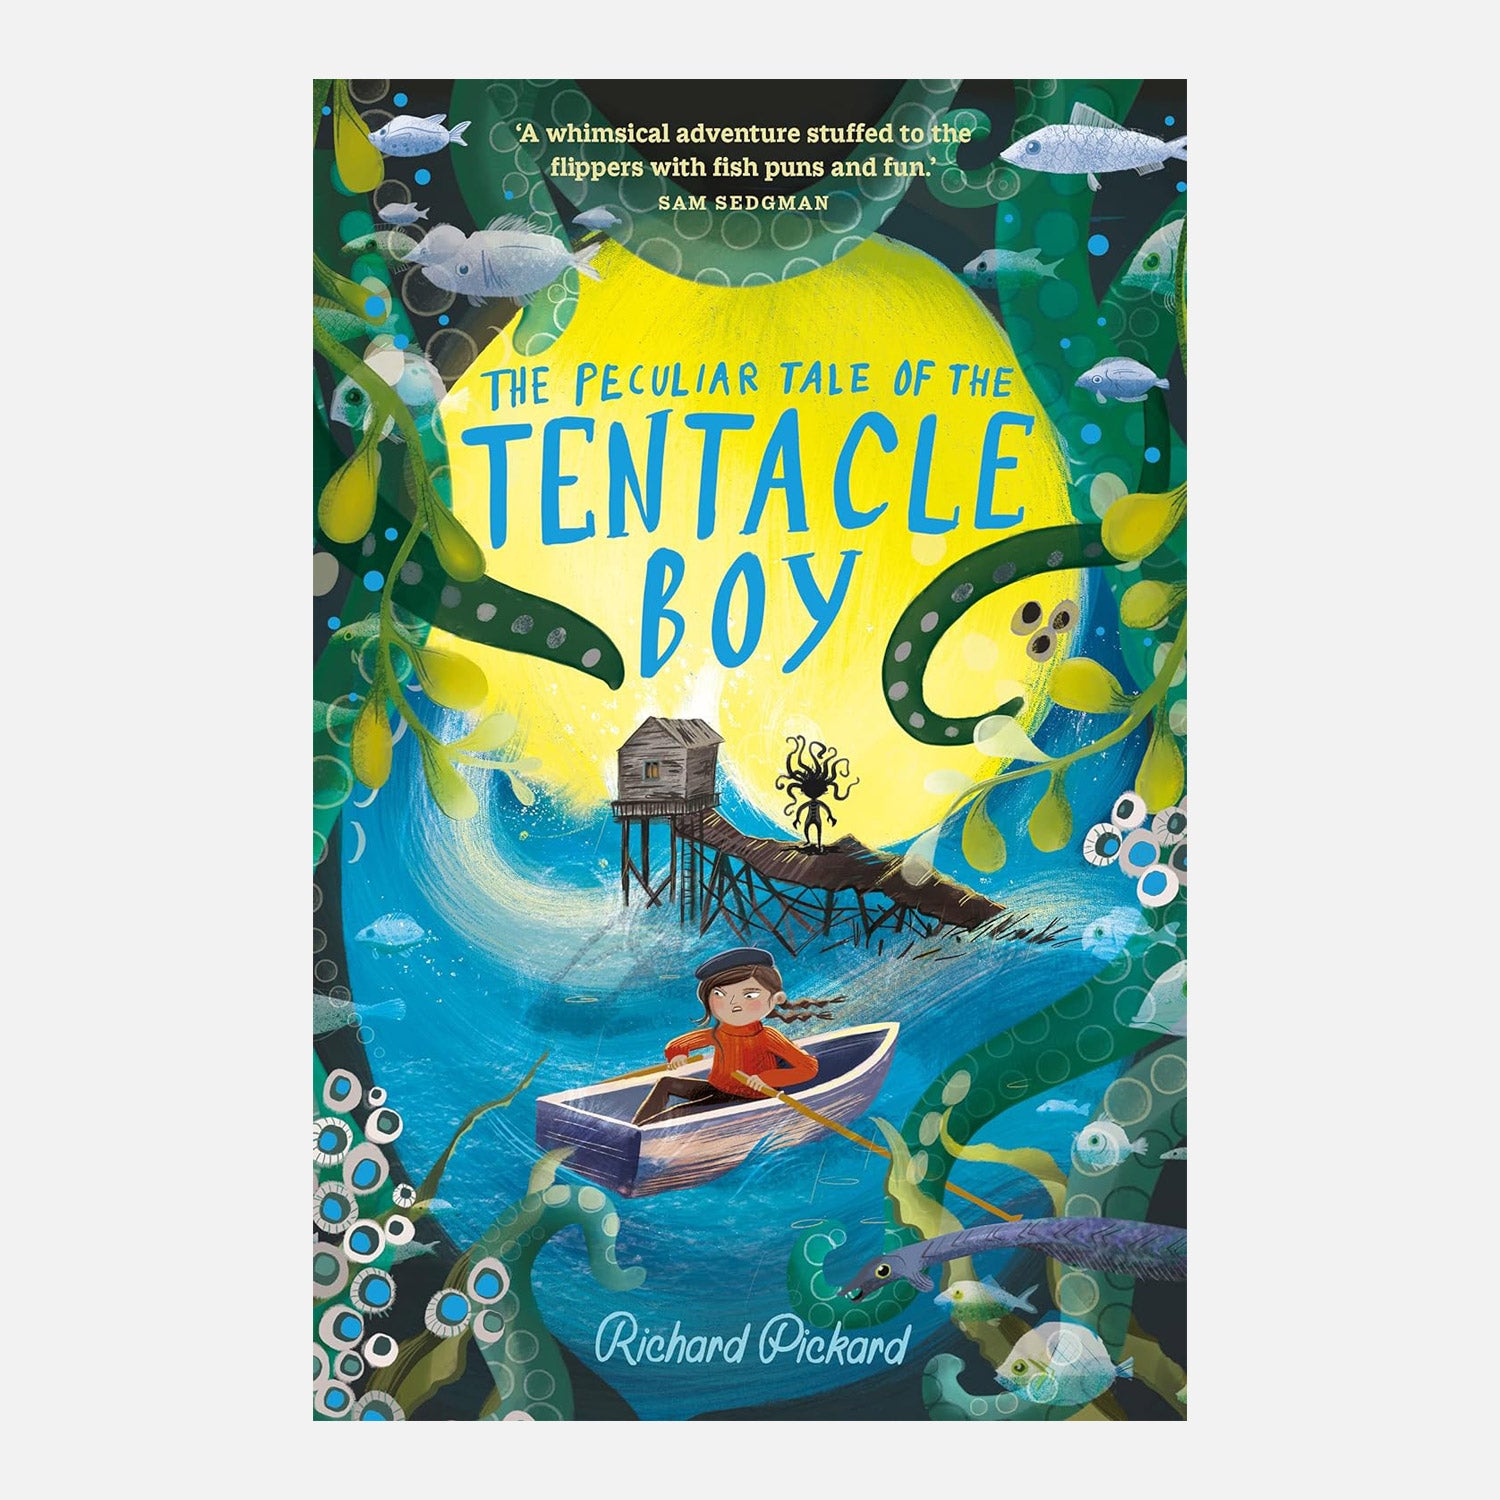 The peculiar tale of the tentacle boy paperback. Cover image shows boy in a row boat heading out in a storm surrounded by tentacles. 